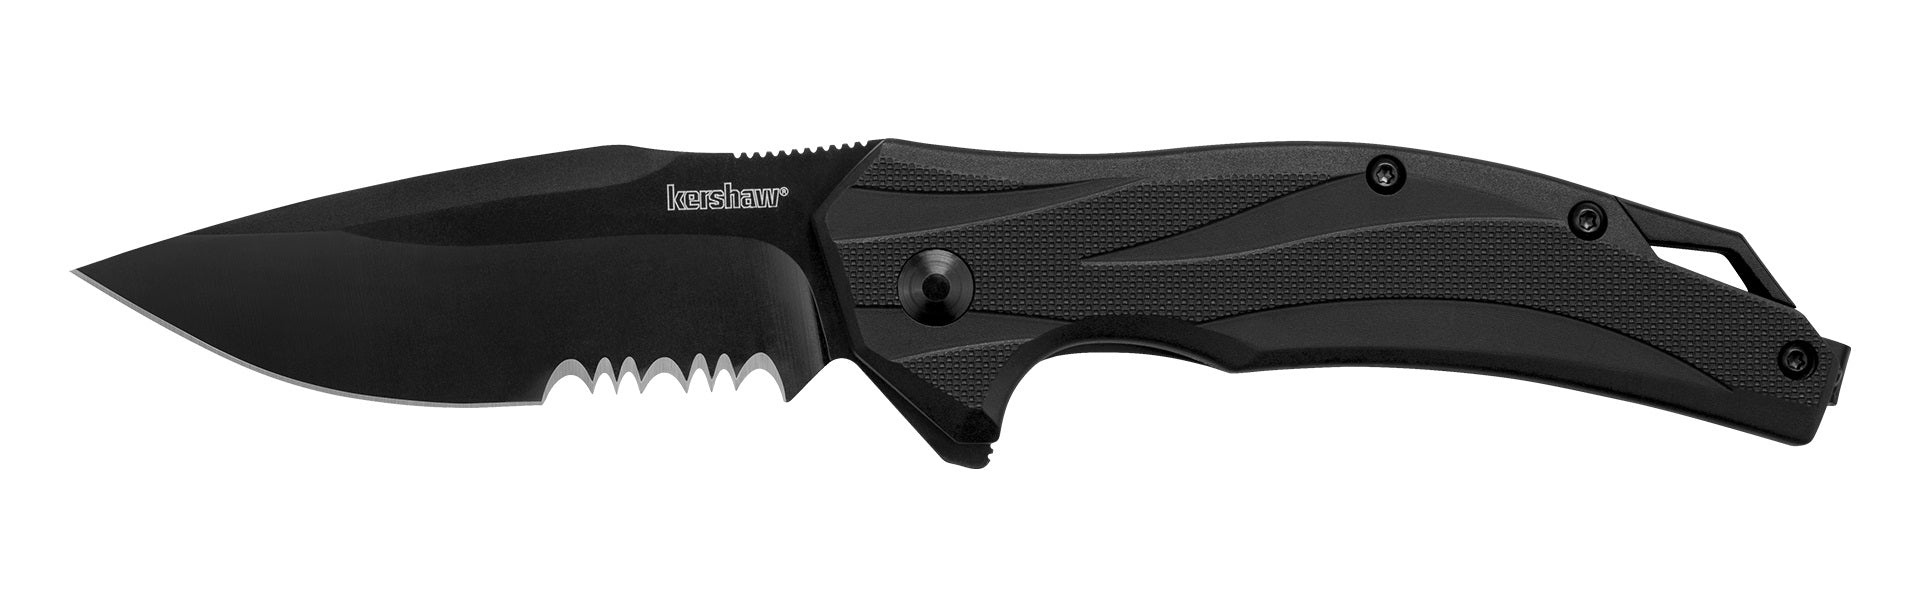 Kershaw Lateral Spring Assisted Knife Black GRN (3.1" Black Serr) 1645BLKST